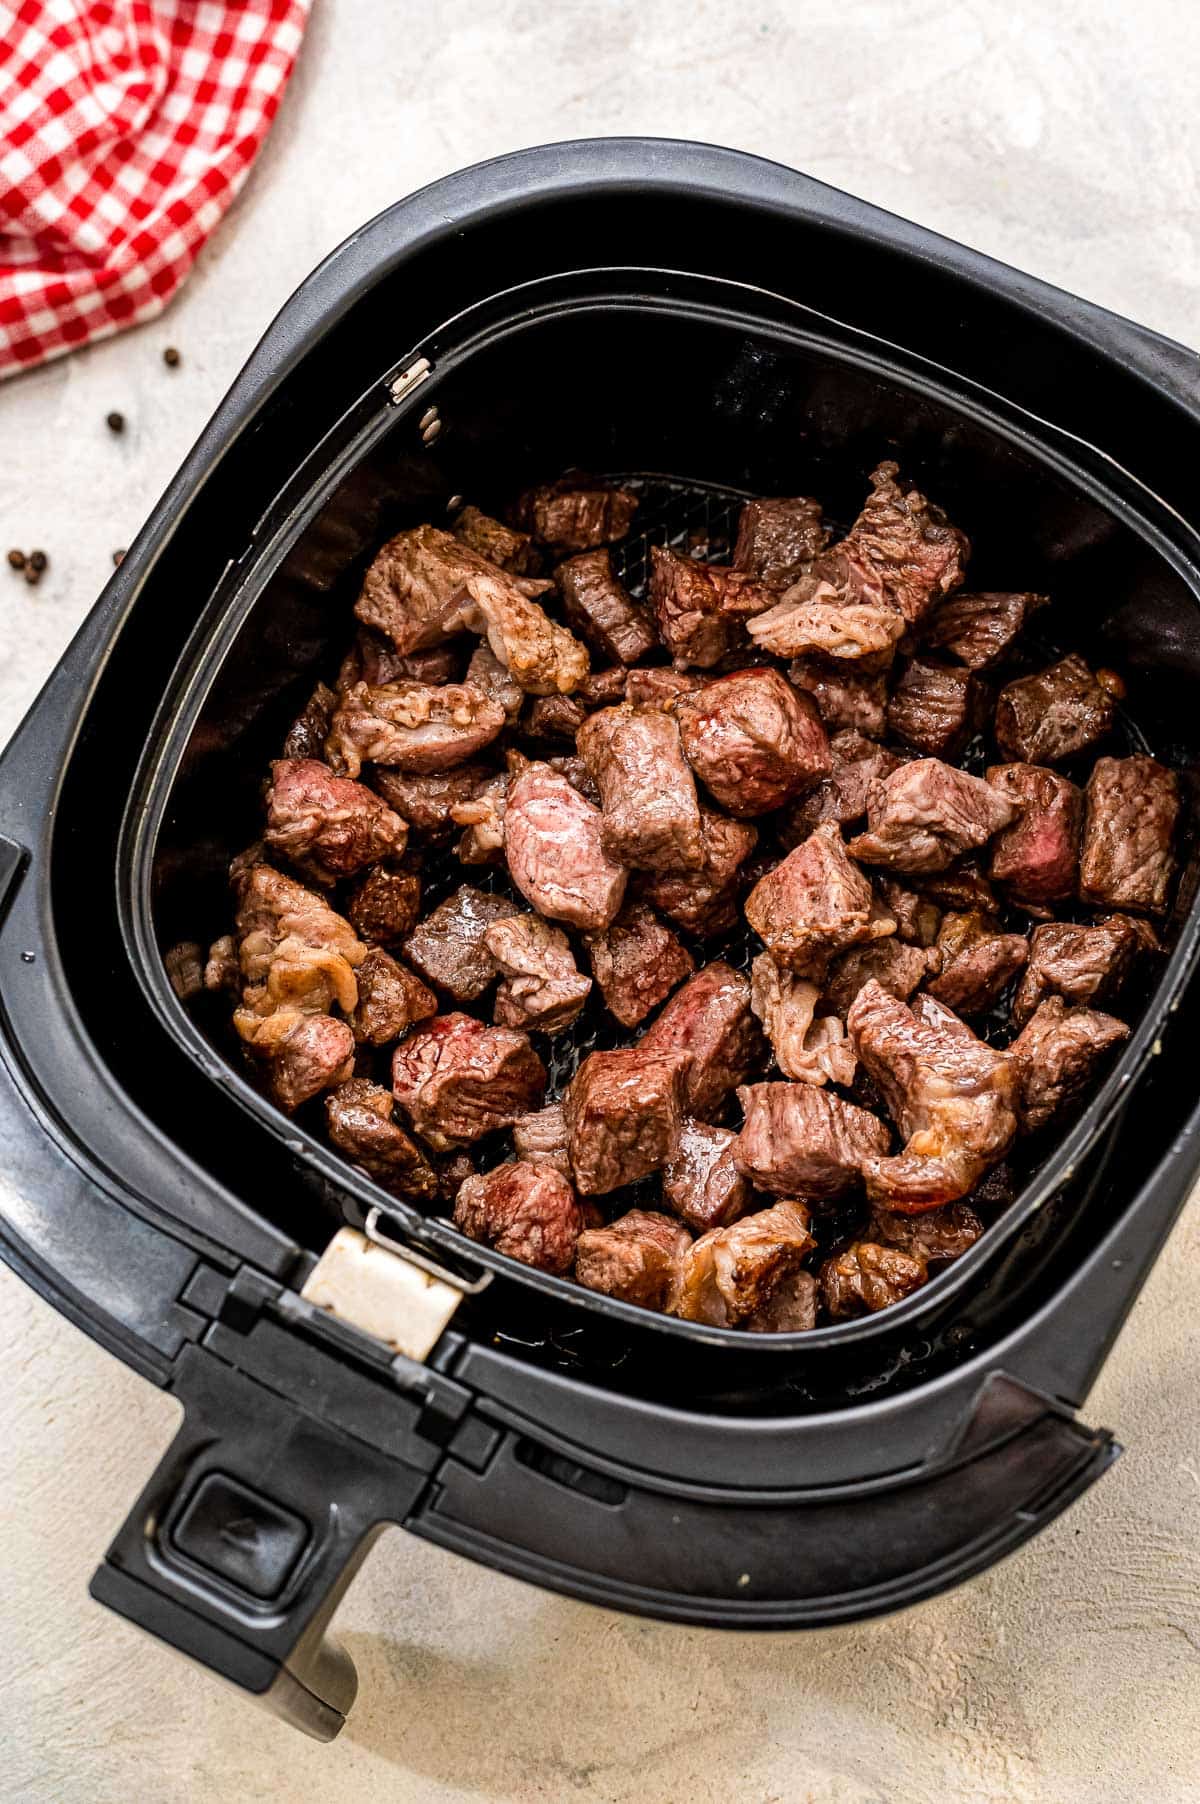 Air Fryer basket with cooked steak pieces